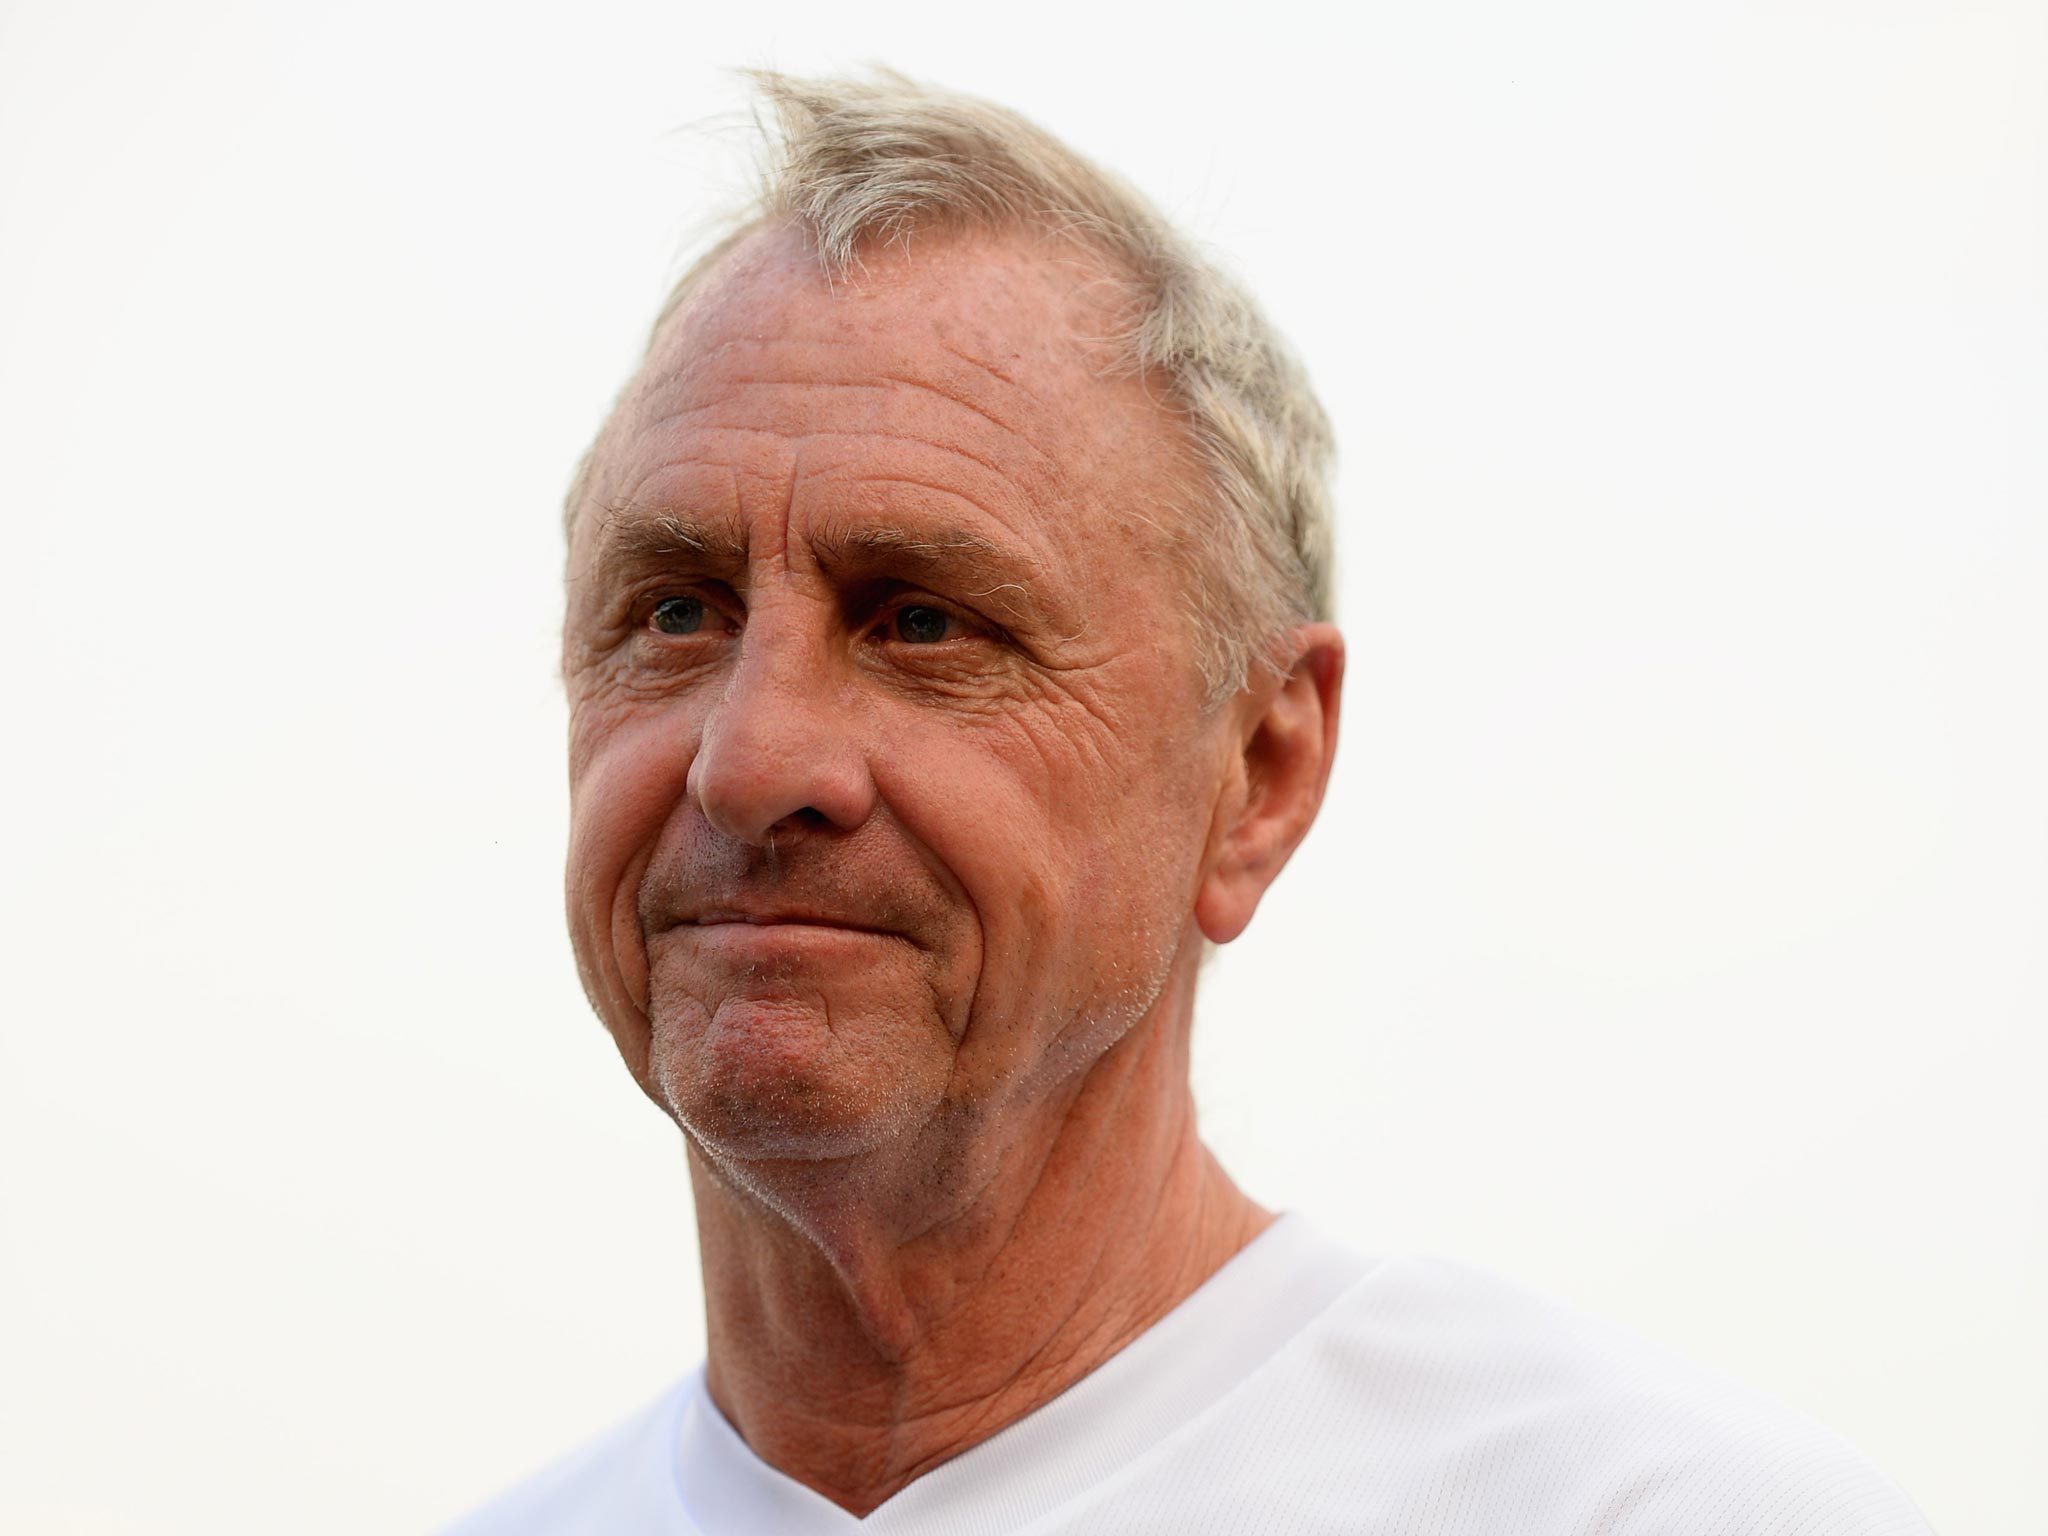 Johan Cruyff has been left bemused by Jose Mourinho's admission that PSG are favourites to go through the Champions League quarter-finals